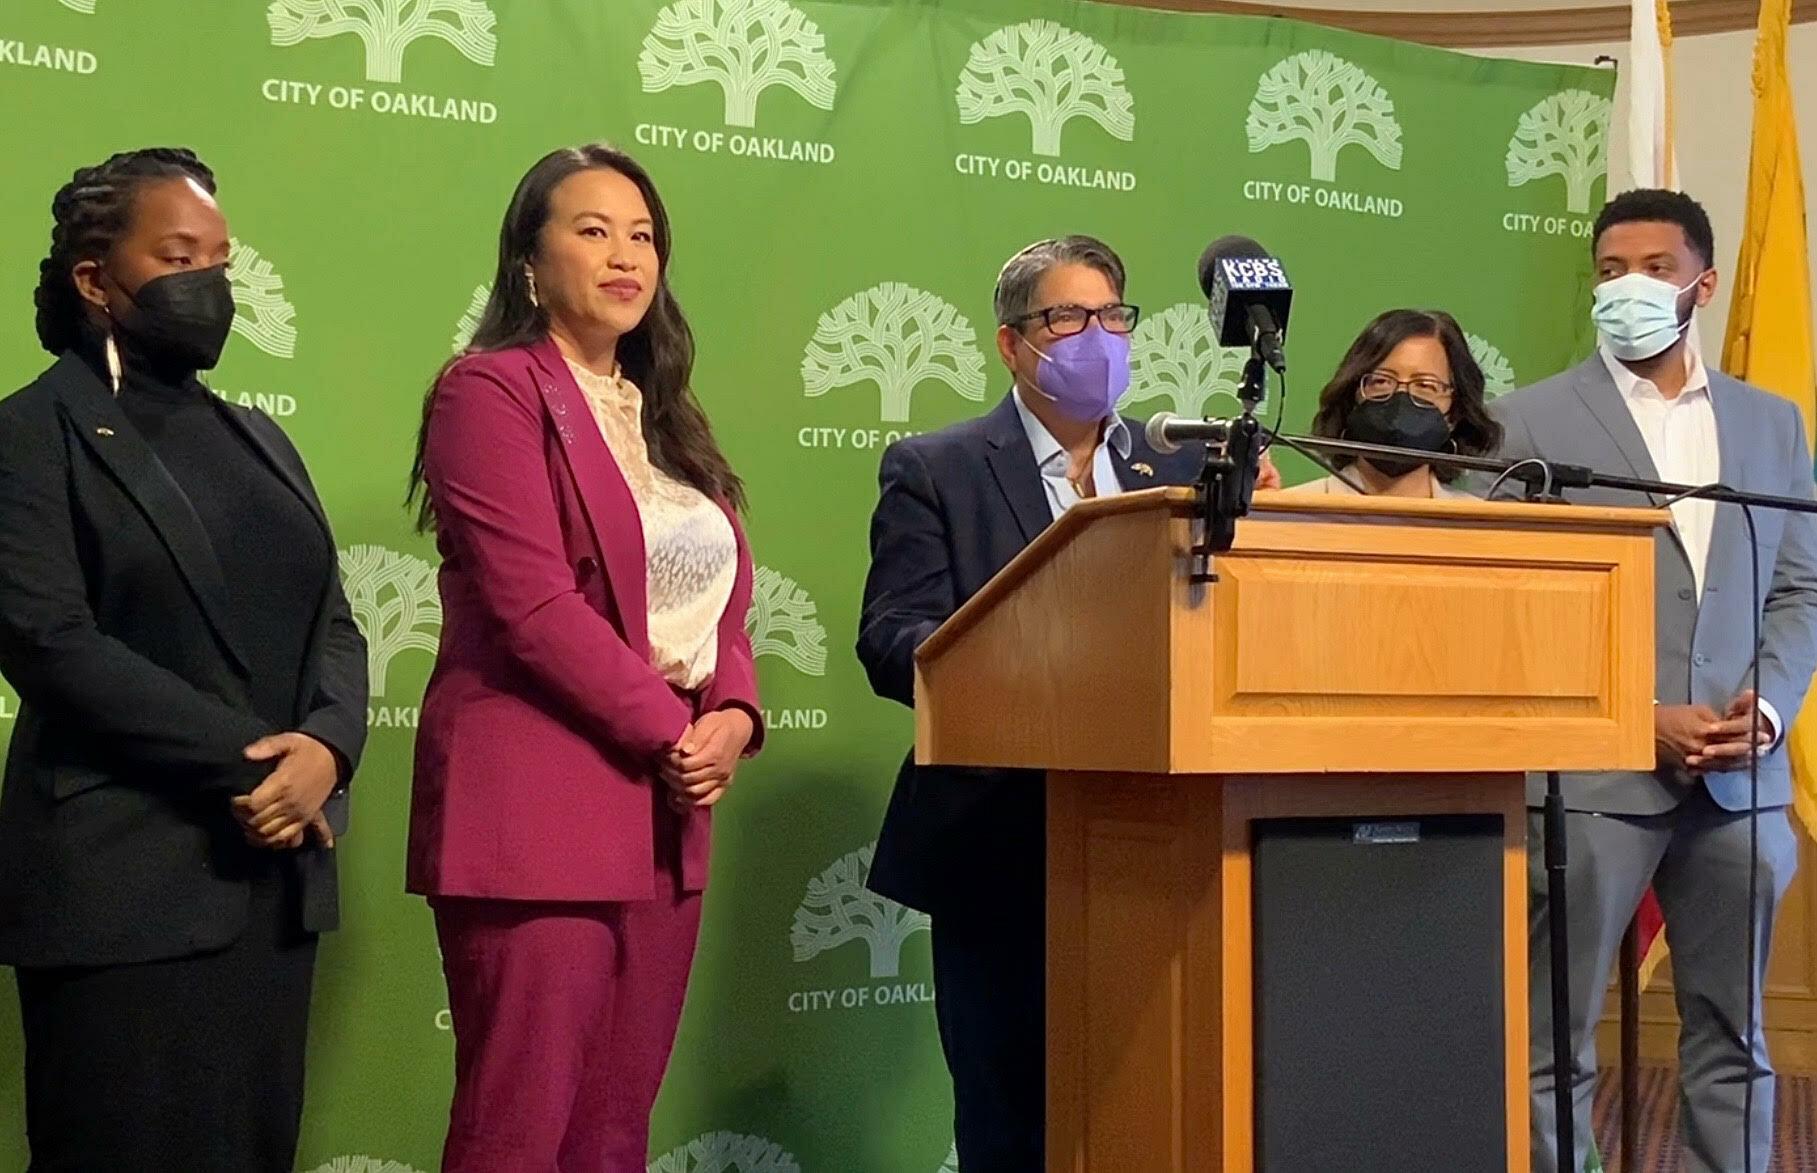 Pictured (left to right) : Councilmember Fife, Mayor Thao, Councilmember Kaplan, Council President Bas, and Councilmember Jenkins